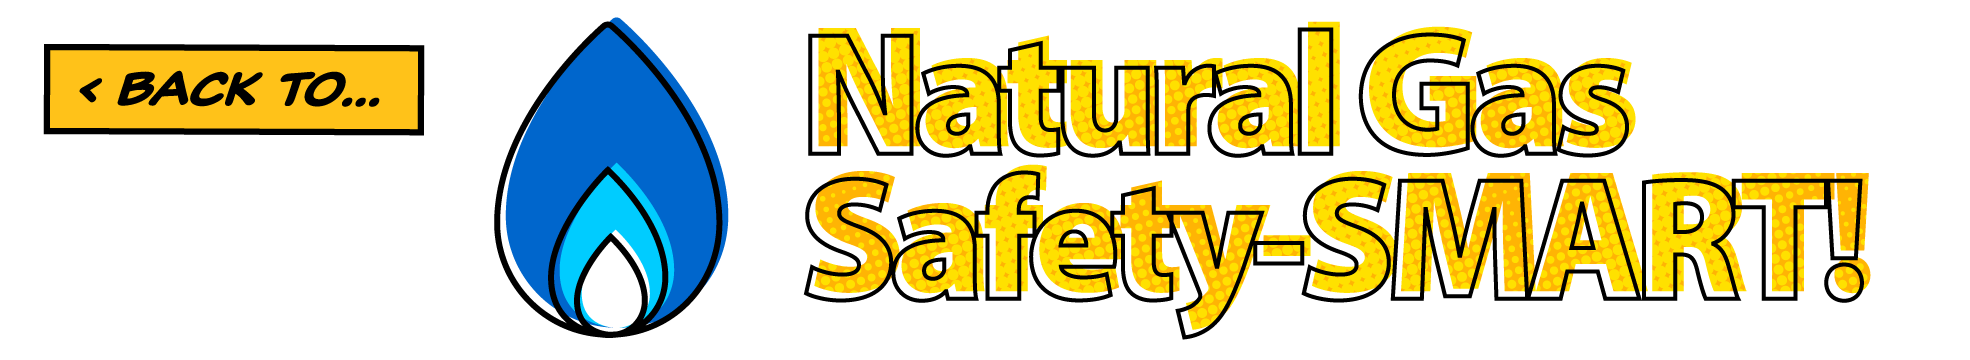 < Back to… Natural Gas Safety-SMART! 